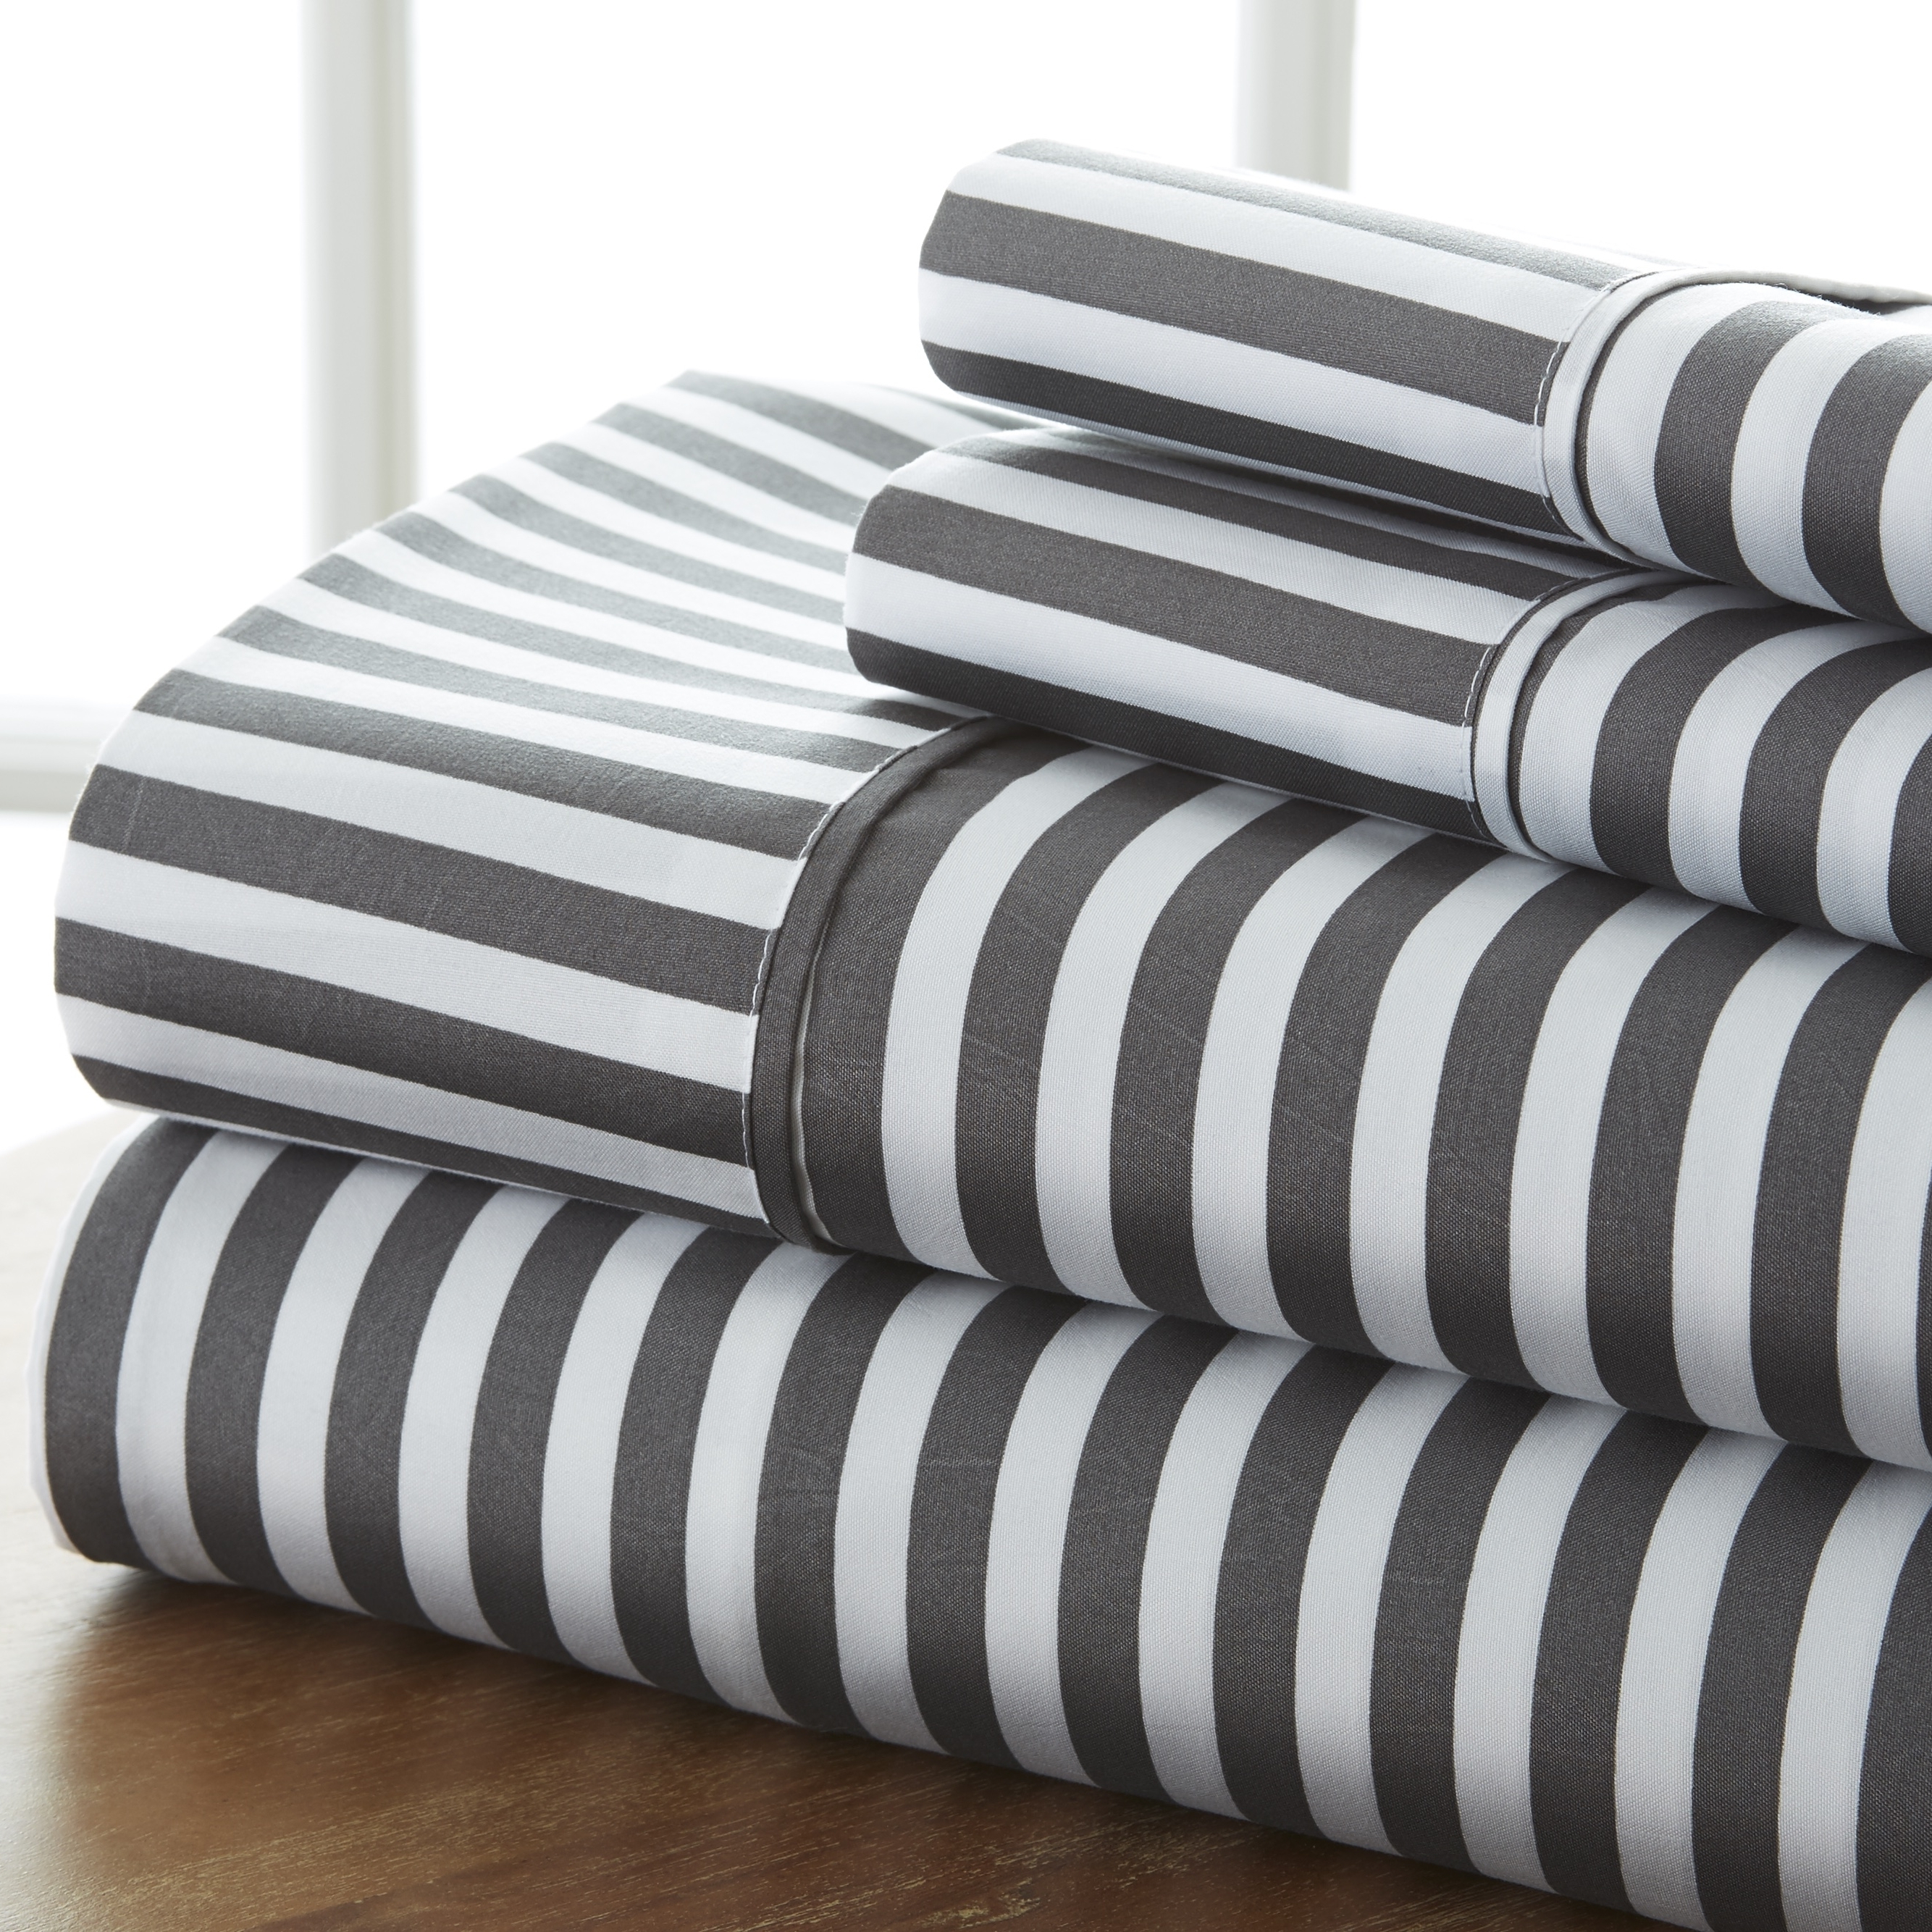 Home Collection Premium Ultra Soft 4 Piece Ribbon Bed Sheet Set - Gray, California King